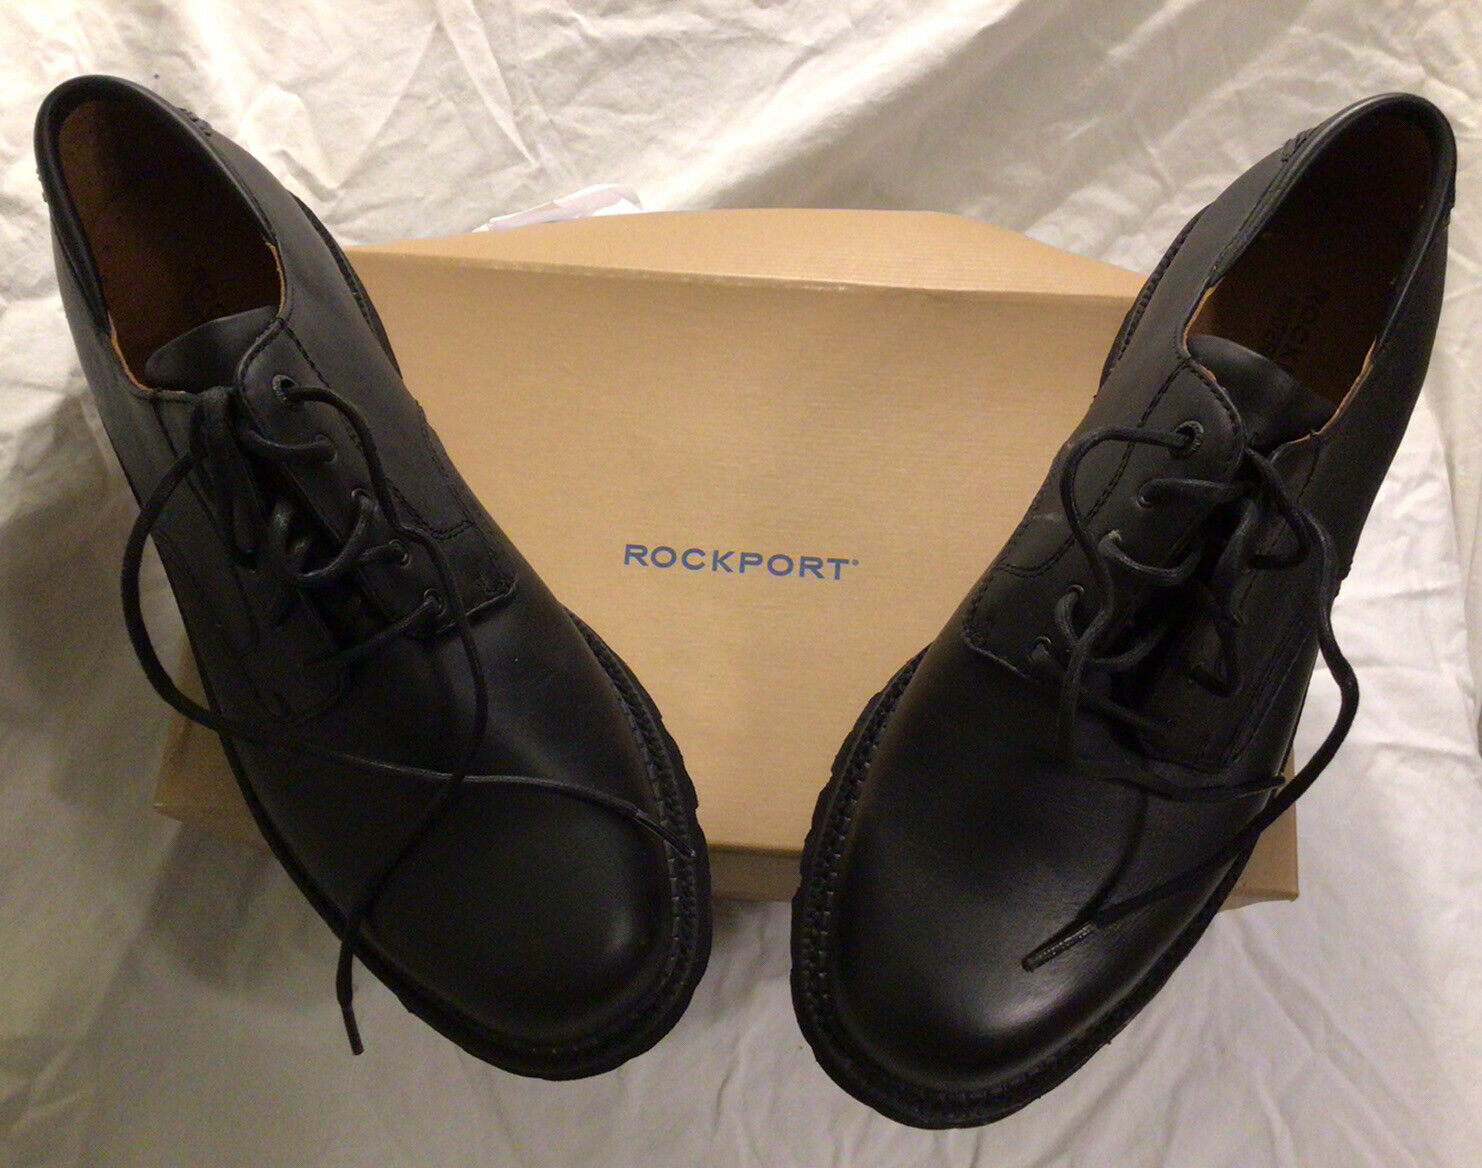 Rockport Size 10 M mens shoes New And Never Worn “Oklahoma” with Box Waterproof